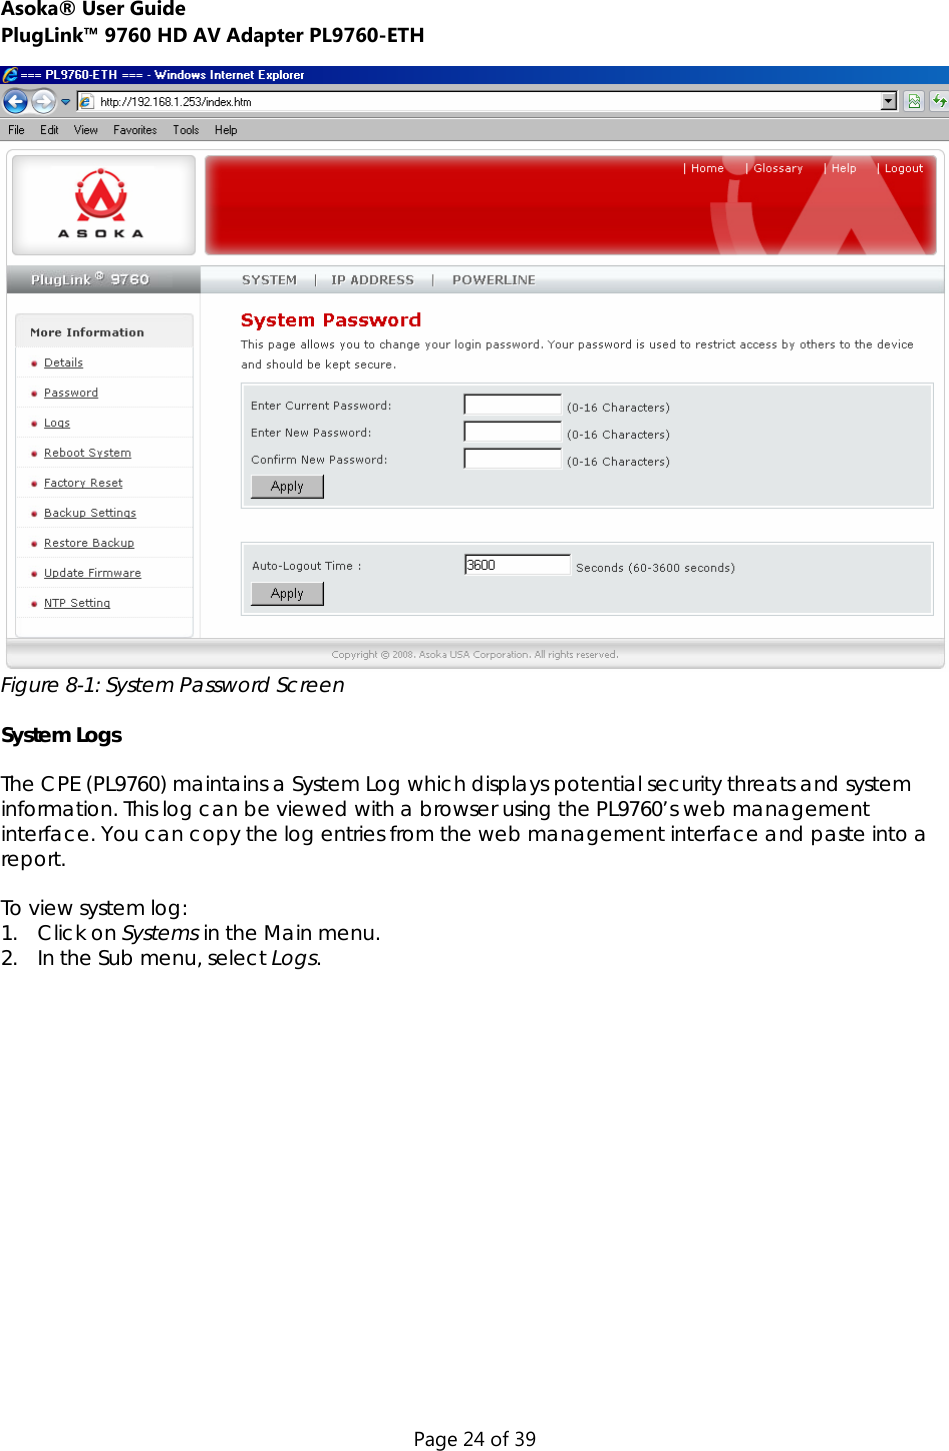 Asoka® User Guide  PlugLink™ 9760 HD AV Adapter PL9760-ETH Page 24 of 39  Figure 8-1: System Password Screen  System Logs  The CPE (PL9760) maintains a System Log which displays potential security threats and system information. This log can be viewed with a browser using the PL9760’s web management interface. You can copy the log entries from the web management interface and paste into a report.  To view system log: 1. Click on Systems in the Main menu. 2. In the Sub menu, select Logs.  